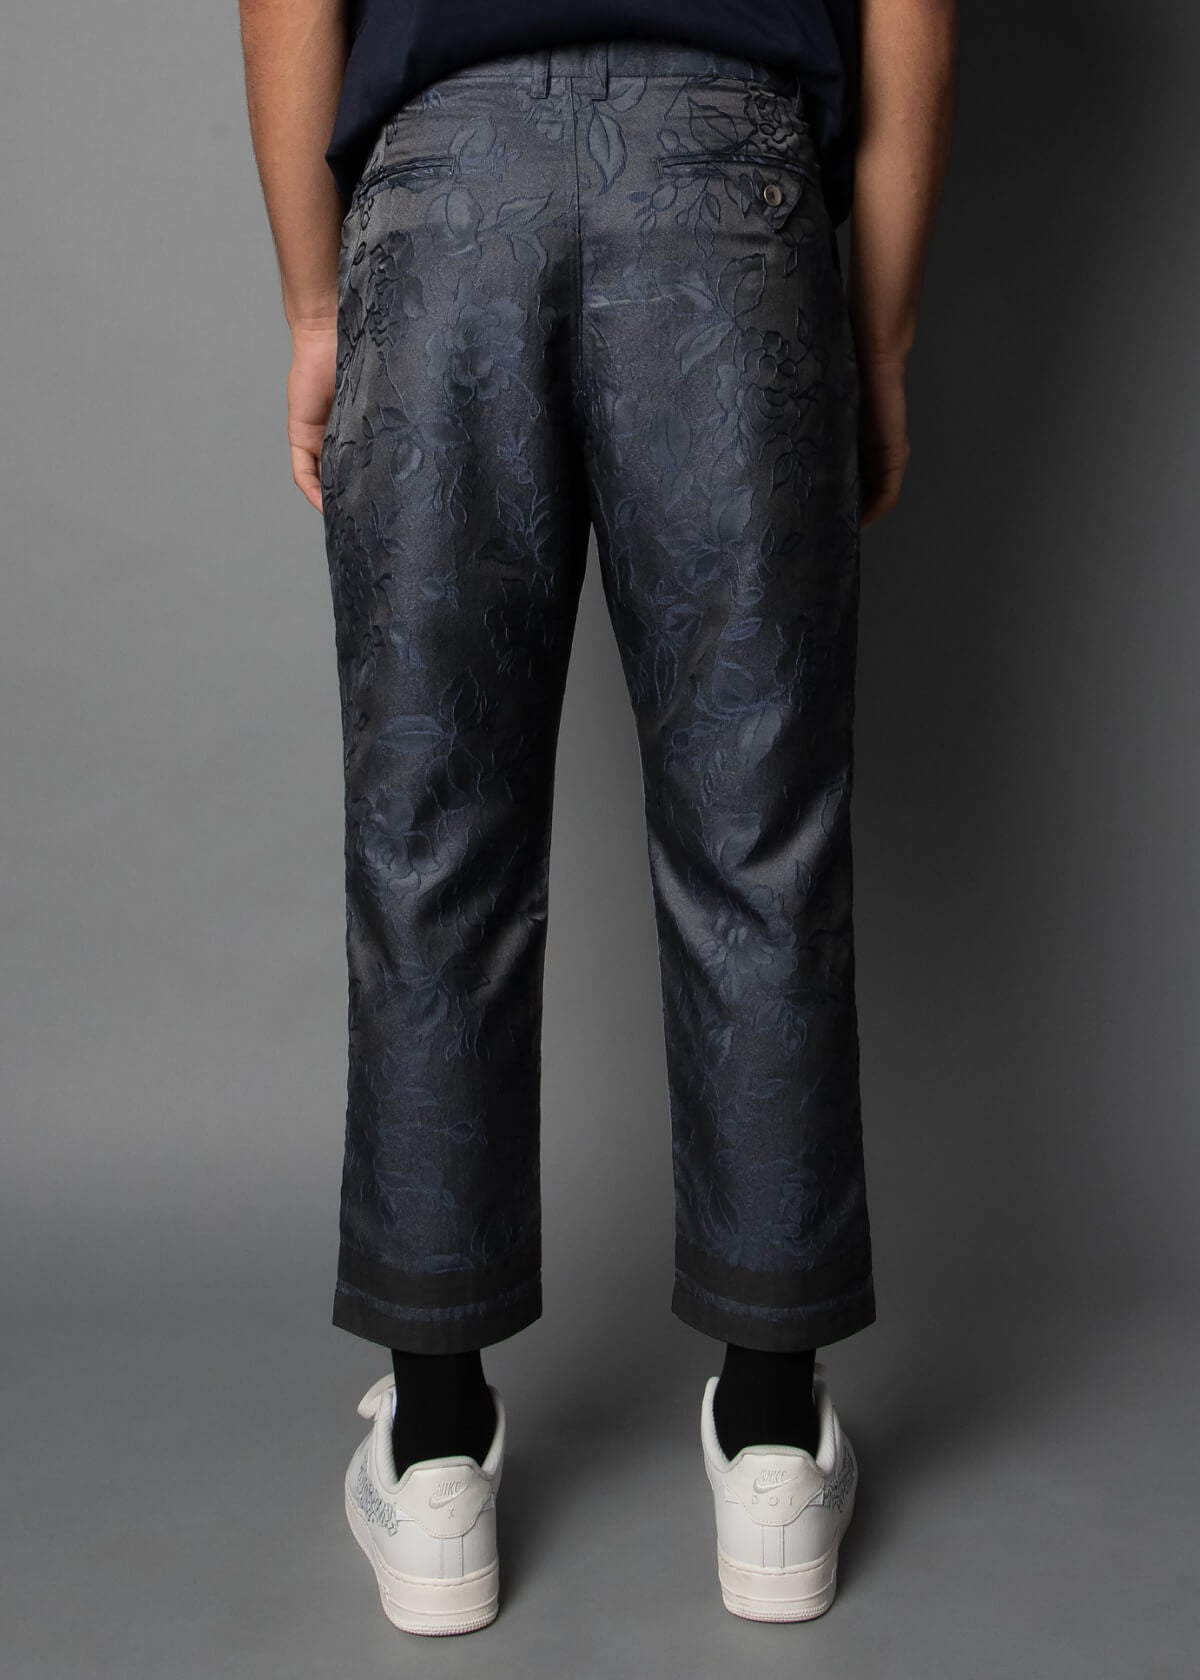 brocade men's pants with a flower pattern